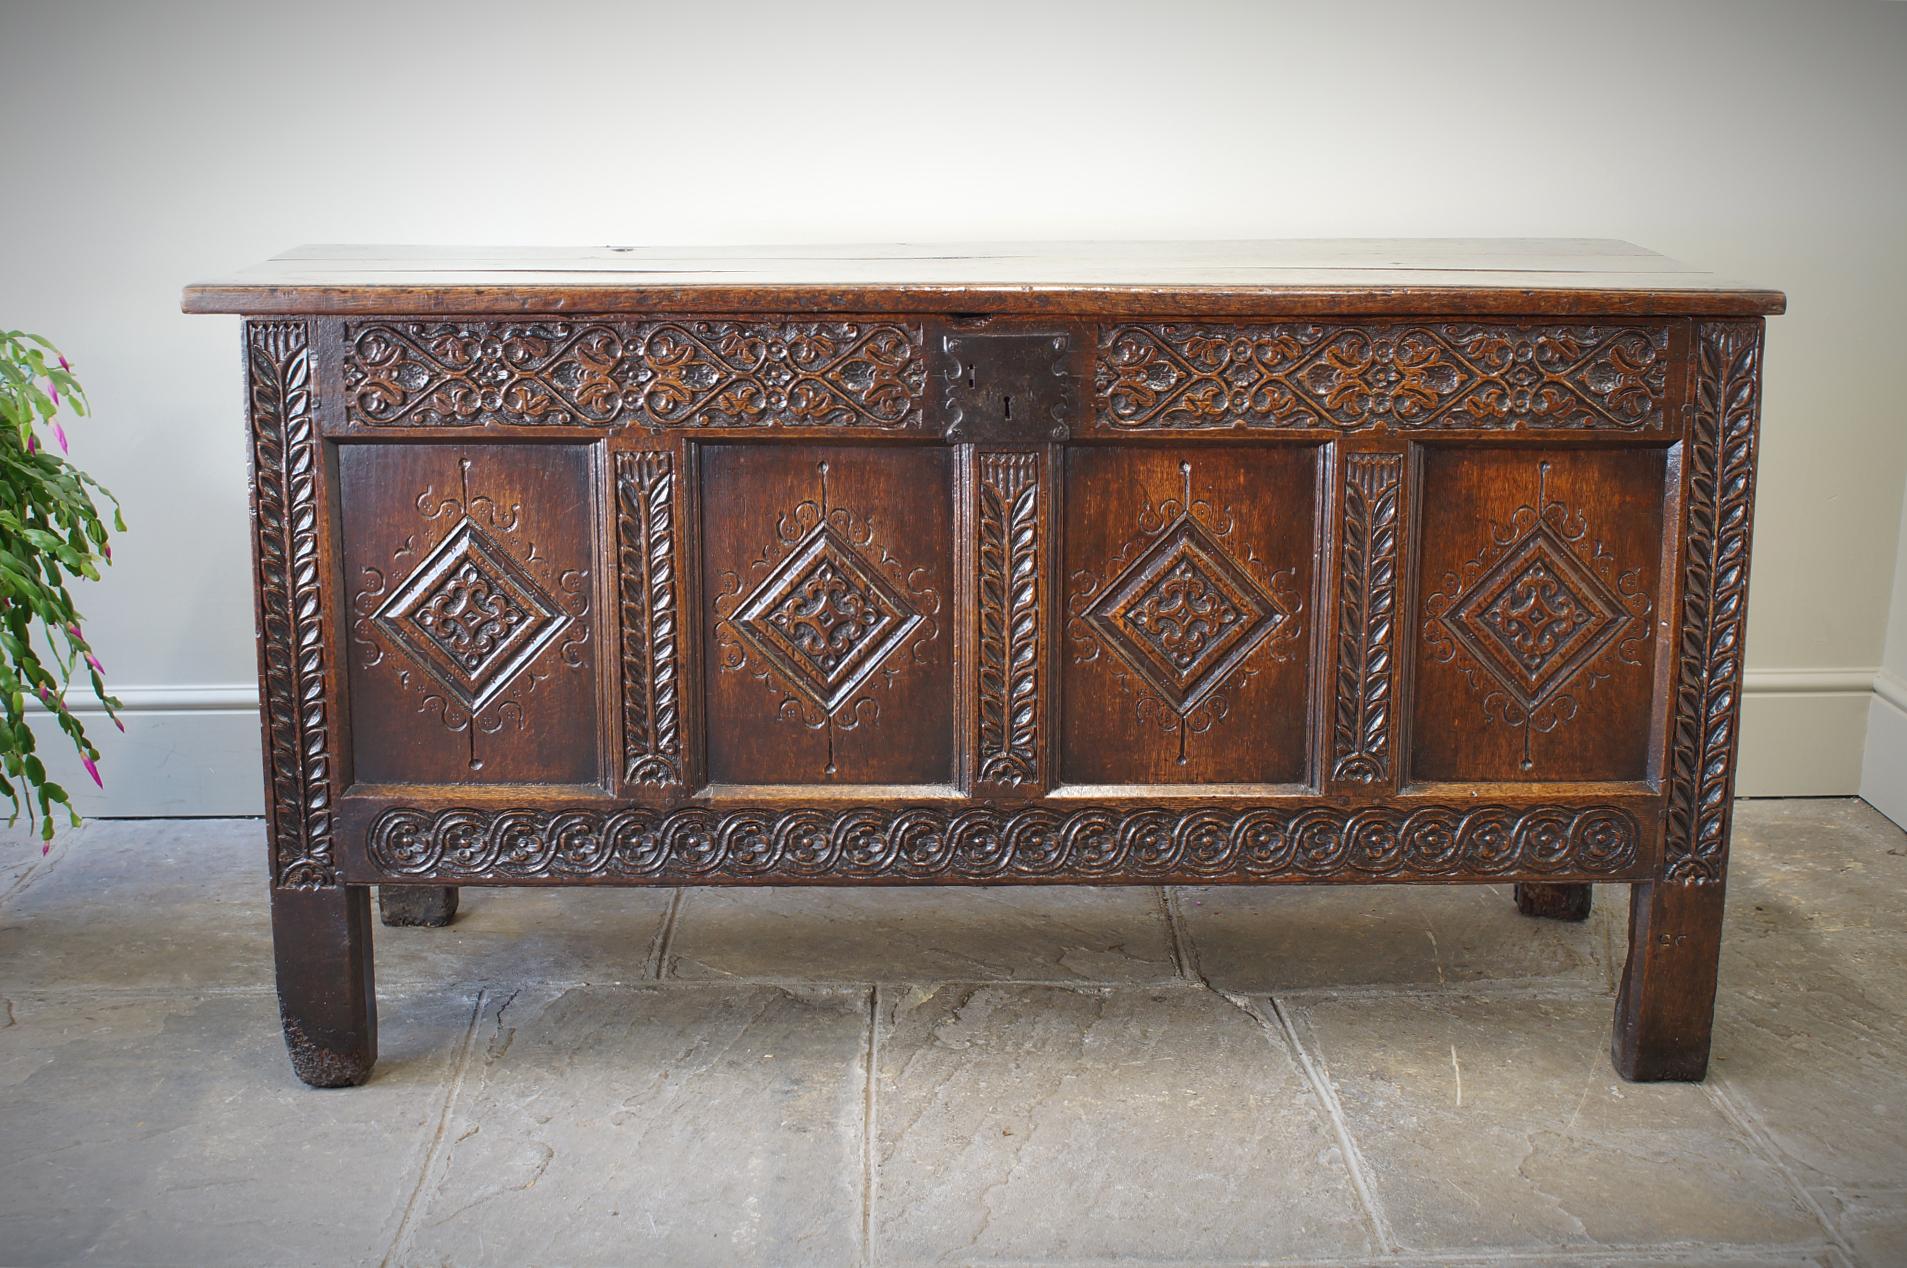 A superb example of a 17th Century  English coffer.  Having a planked lid, the front with a finely carved top rail, lozenge panels and stiff leaf stiles. All the carving is 
well executed and of a style associated with the North Yorkshire region of